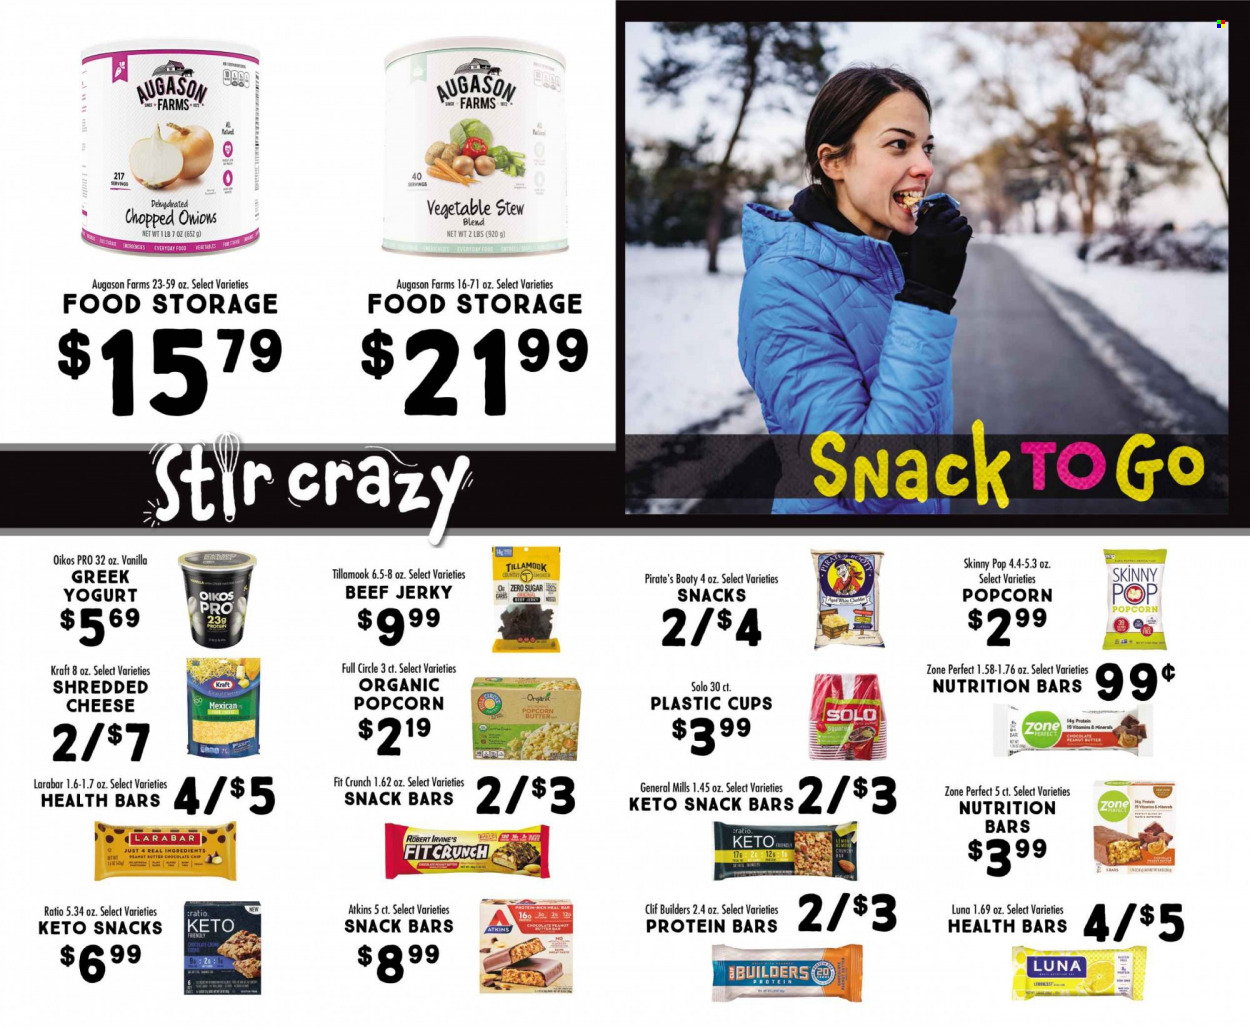 thumbnail - Fresh Market Flyer - 01/04/2023 - 01/31/2023 - Sales products - onion, cod, Kraft®, beef jerky, jerky, shredded cheese, greek yoghurt, yoghurt, Oikos, chocolate chips, snack, snack bar, popcorn, Skinny Pop, nutrition bar, protein bar, Zone Perfect, peanut butter, cup, smoker. Page 12.